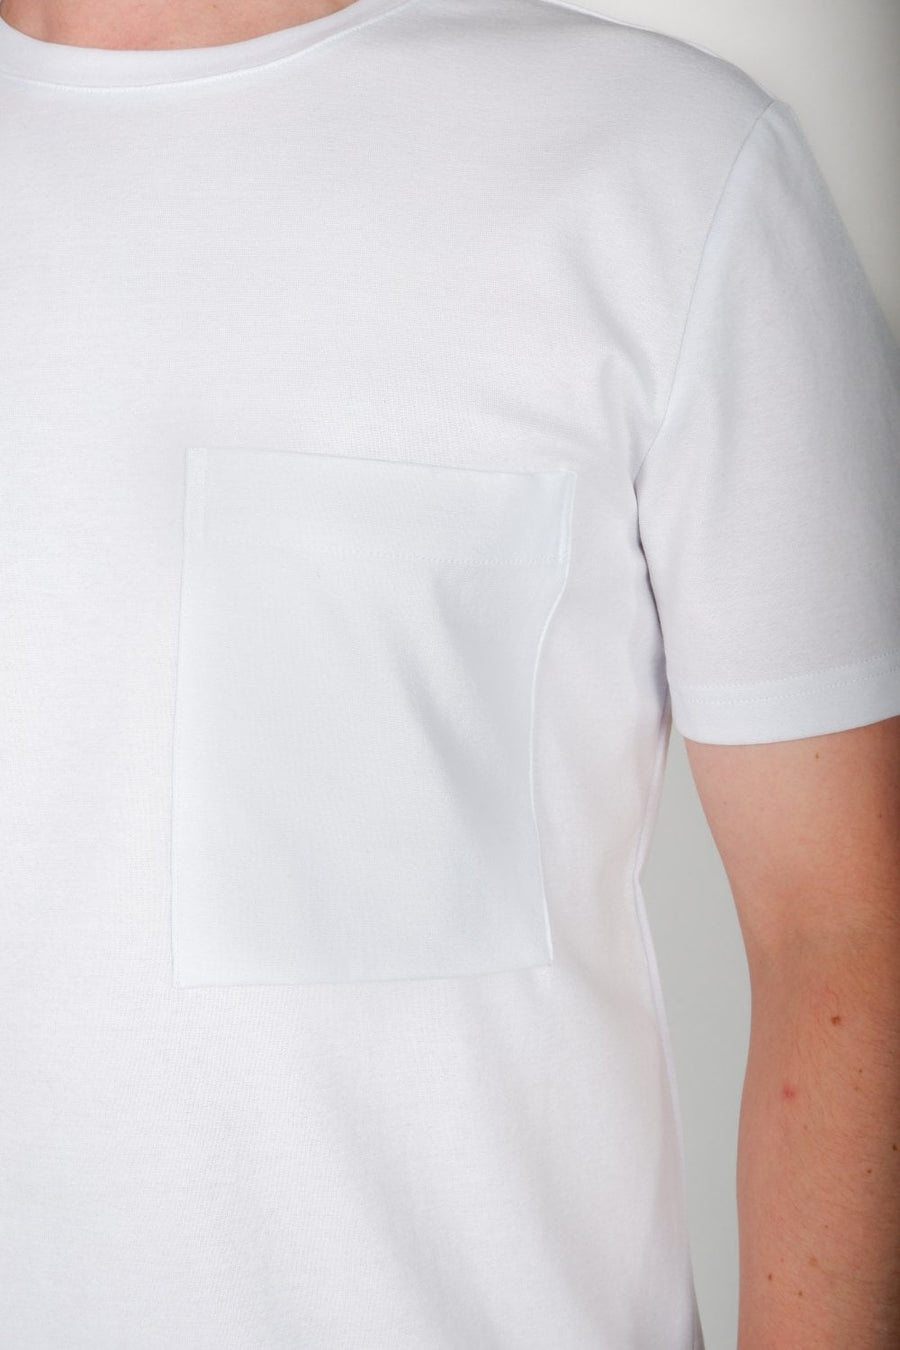 Buy the Antony Morato Front Pocket T-Shirt White at Intro. Spend £50 for free UK delivery. Official stockists. We ship worldwide.